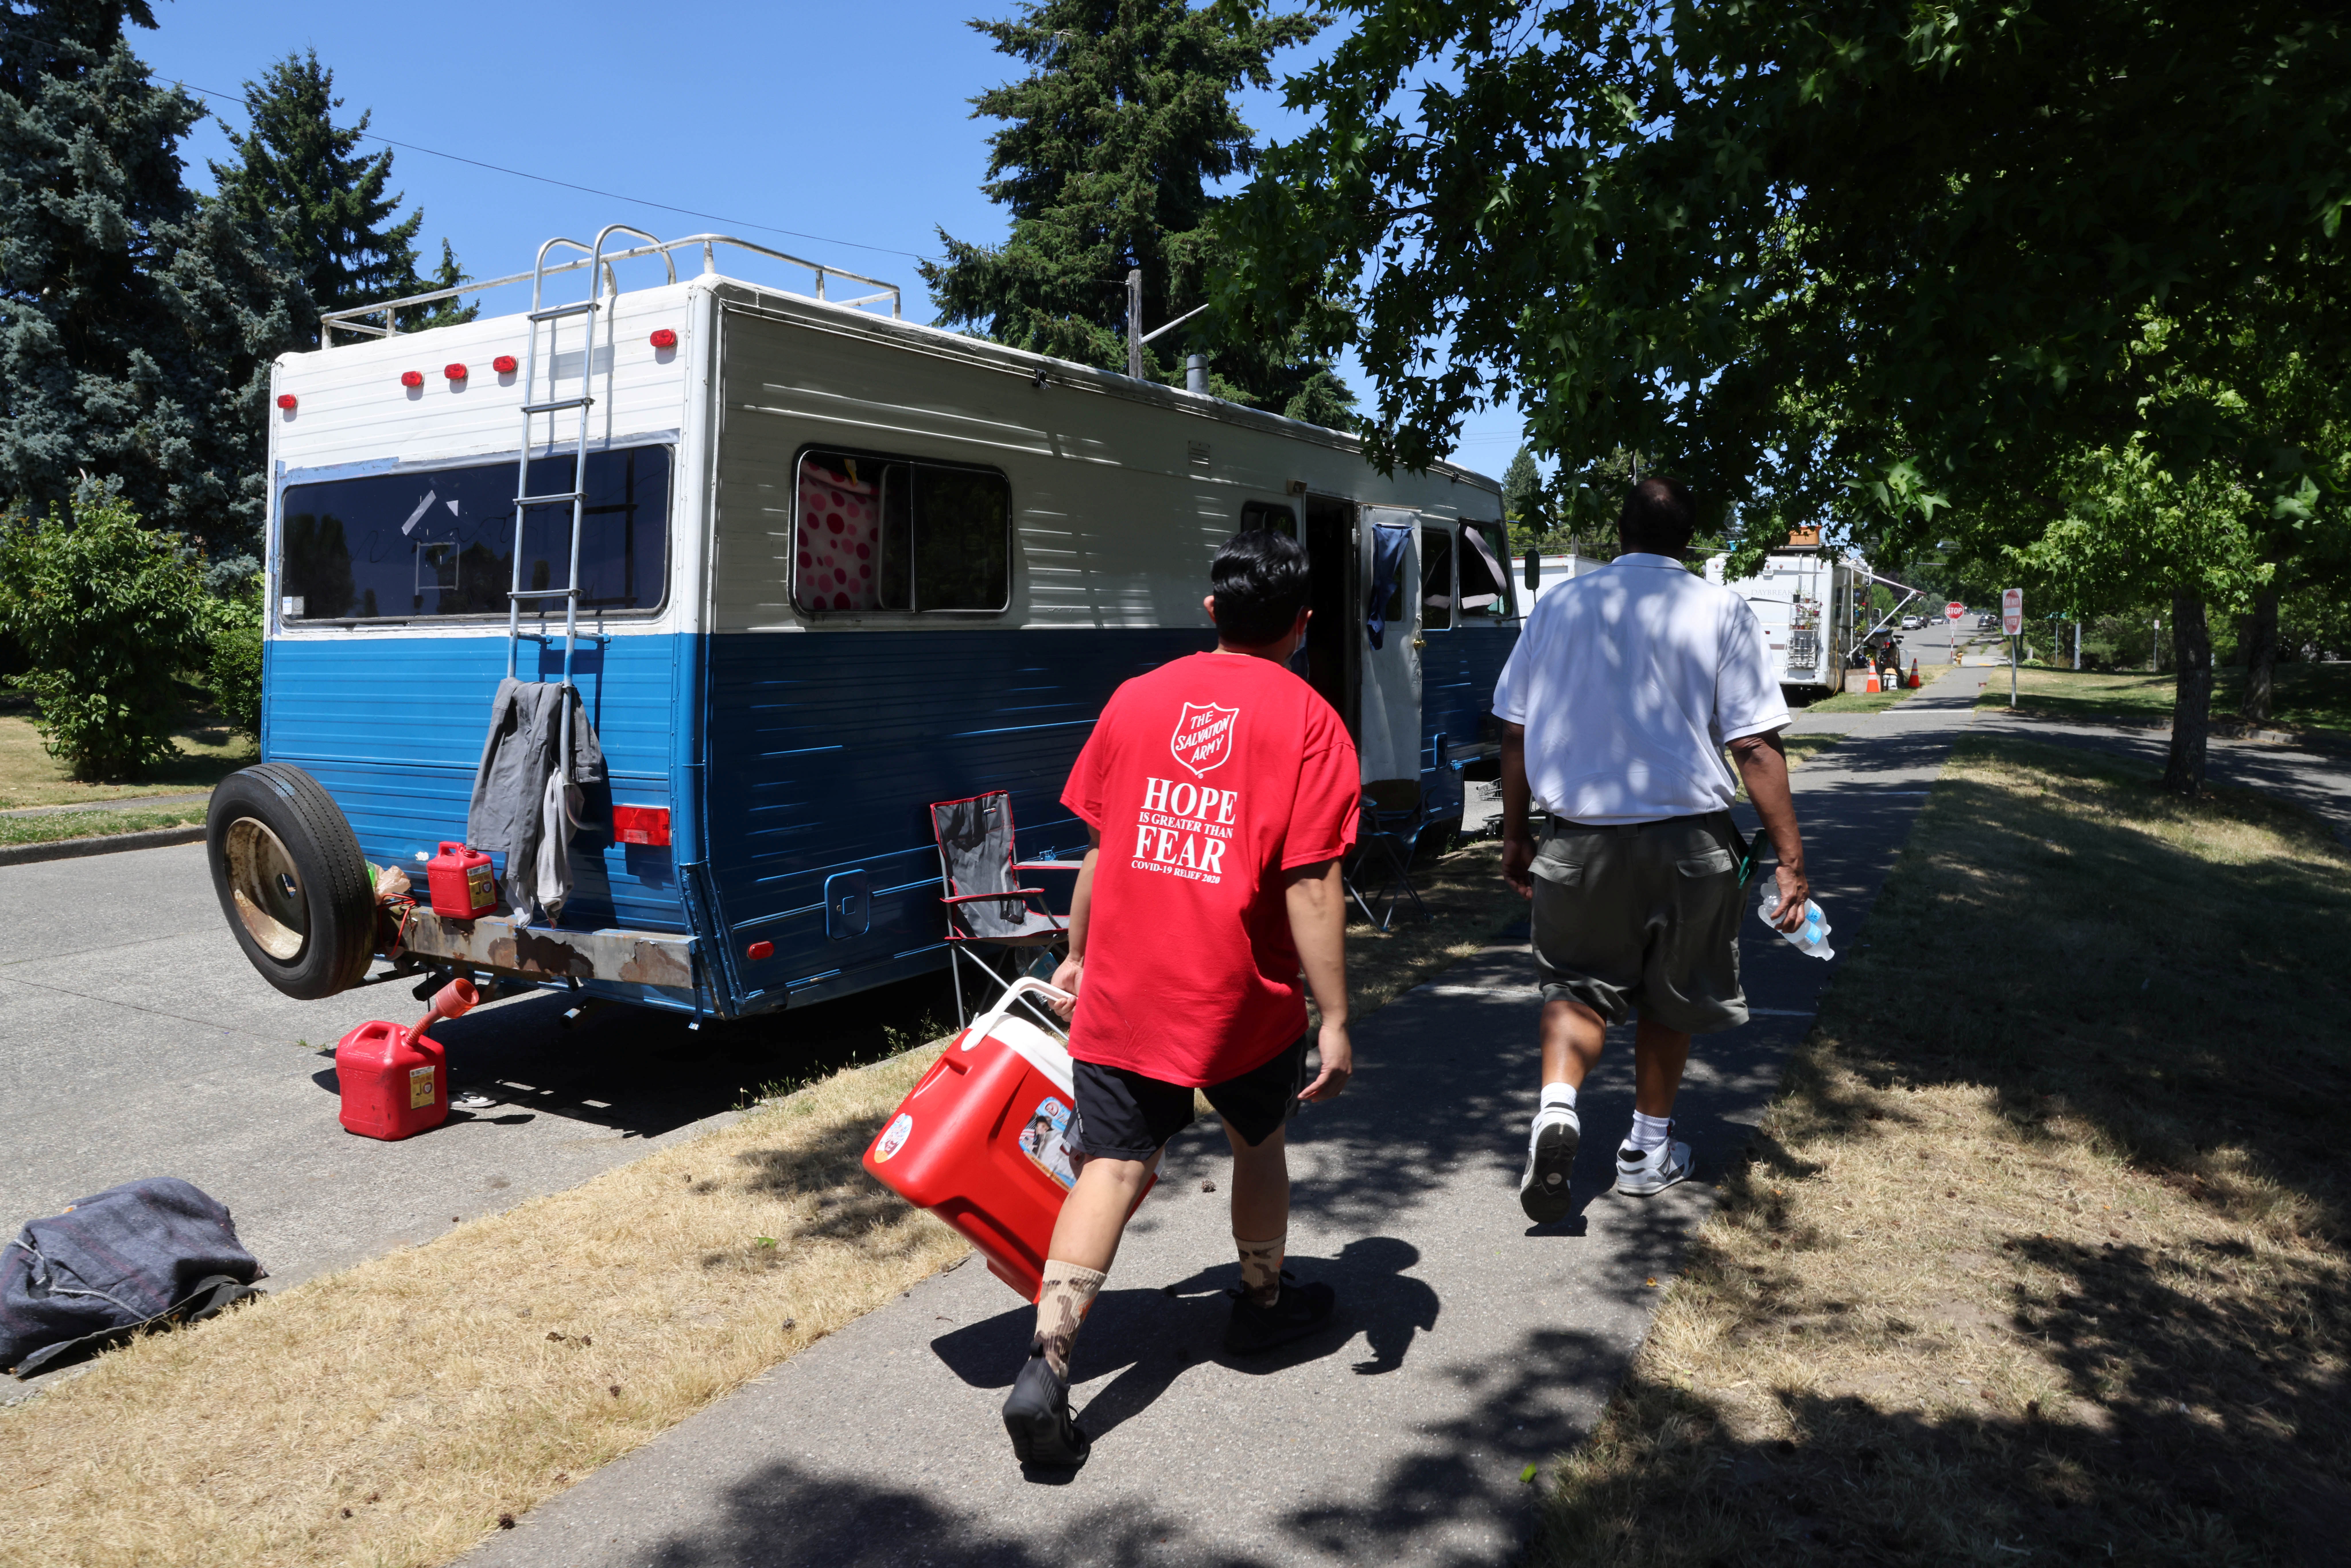 Shanton Alcaraz and Steve Huntley from the Salvation Army Northwest Division hand out water to people who might need it and invite them to their nearby cooling center for food and beverages during a heat wave in Seattle, Washington, U.S., June 27, 2021. REUTERS/Karen Ducey